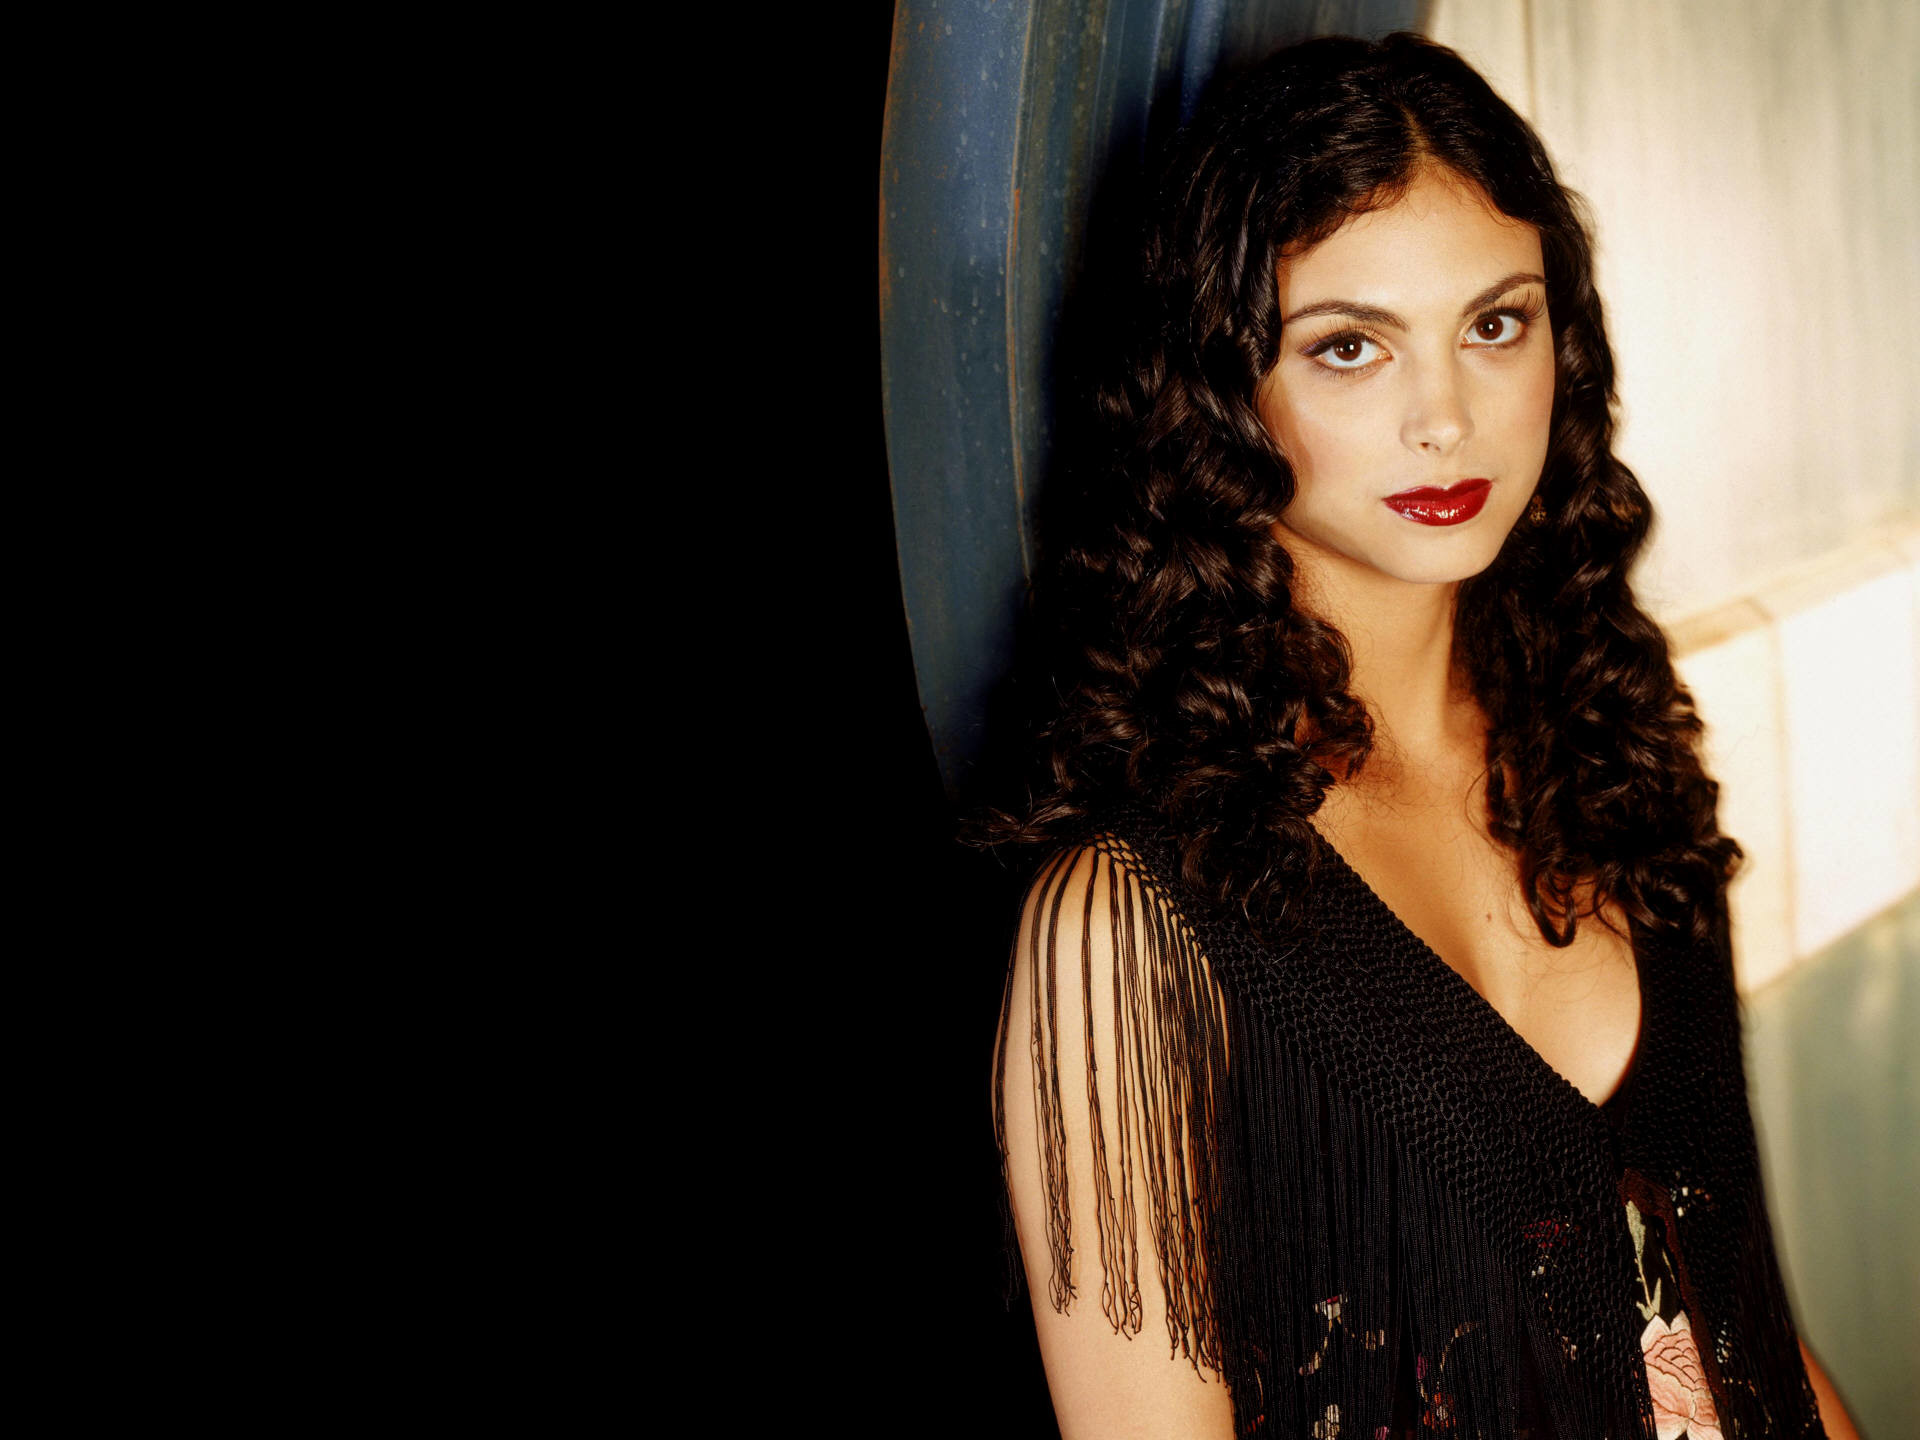 1920x1440 Wallpapers Morena Baccarin Celebrities